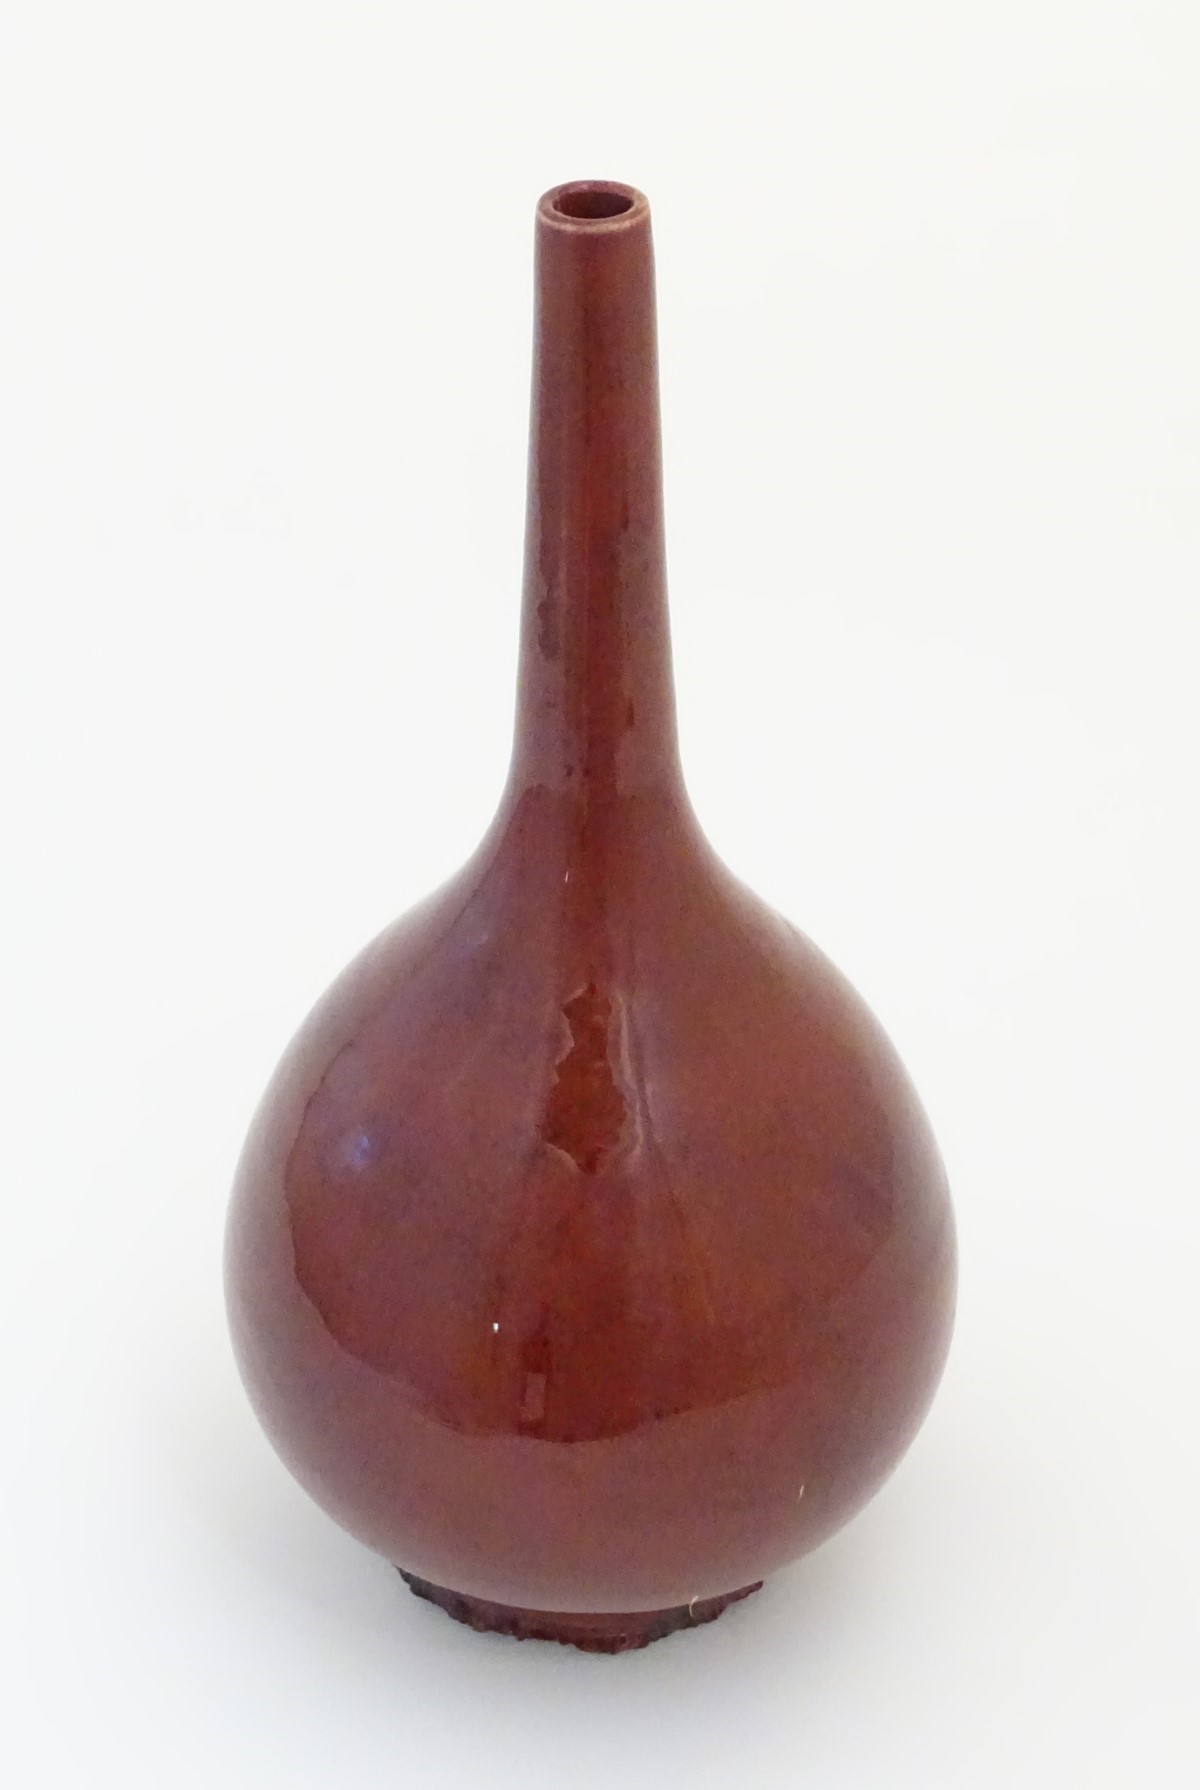 A Chinese pear-shaped vase with a slender, elongated neck with a sang de boeuf glaze. Approx. - Image 3 of 5